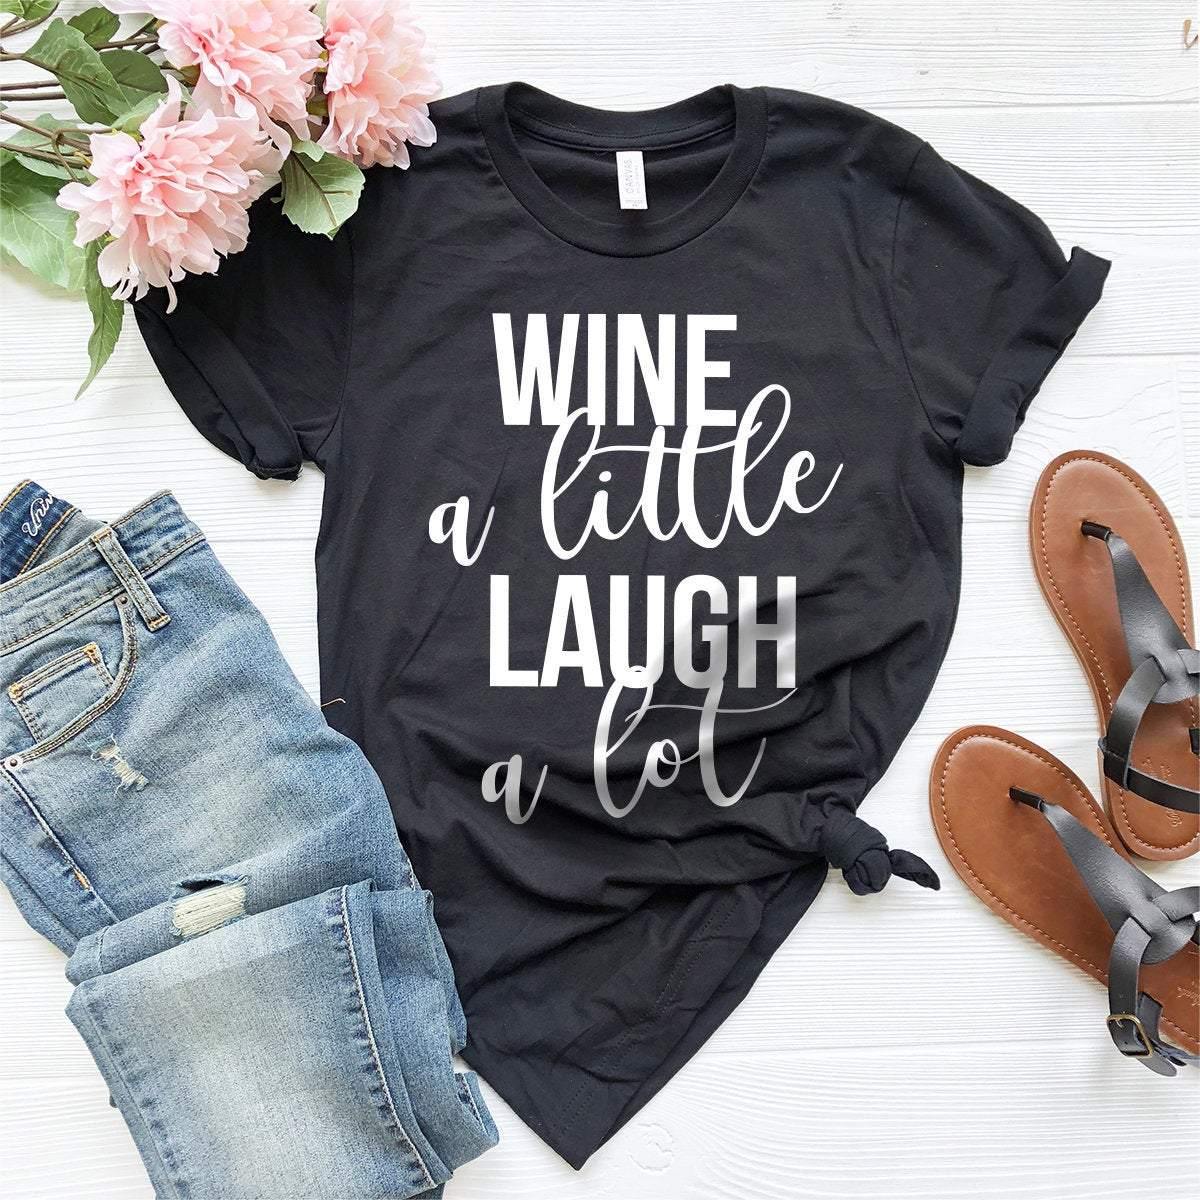 Wine A Little Laugh A Lot  Shirt,Wine Shirt,Wine Lover Shirt,Wine Tee,Funny Wine Shirt,Drinking Shirt,Gift For Wine Lover - Fastdeliverytees.com